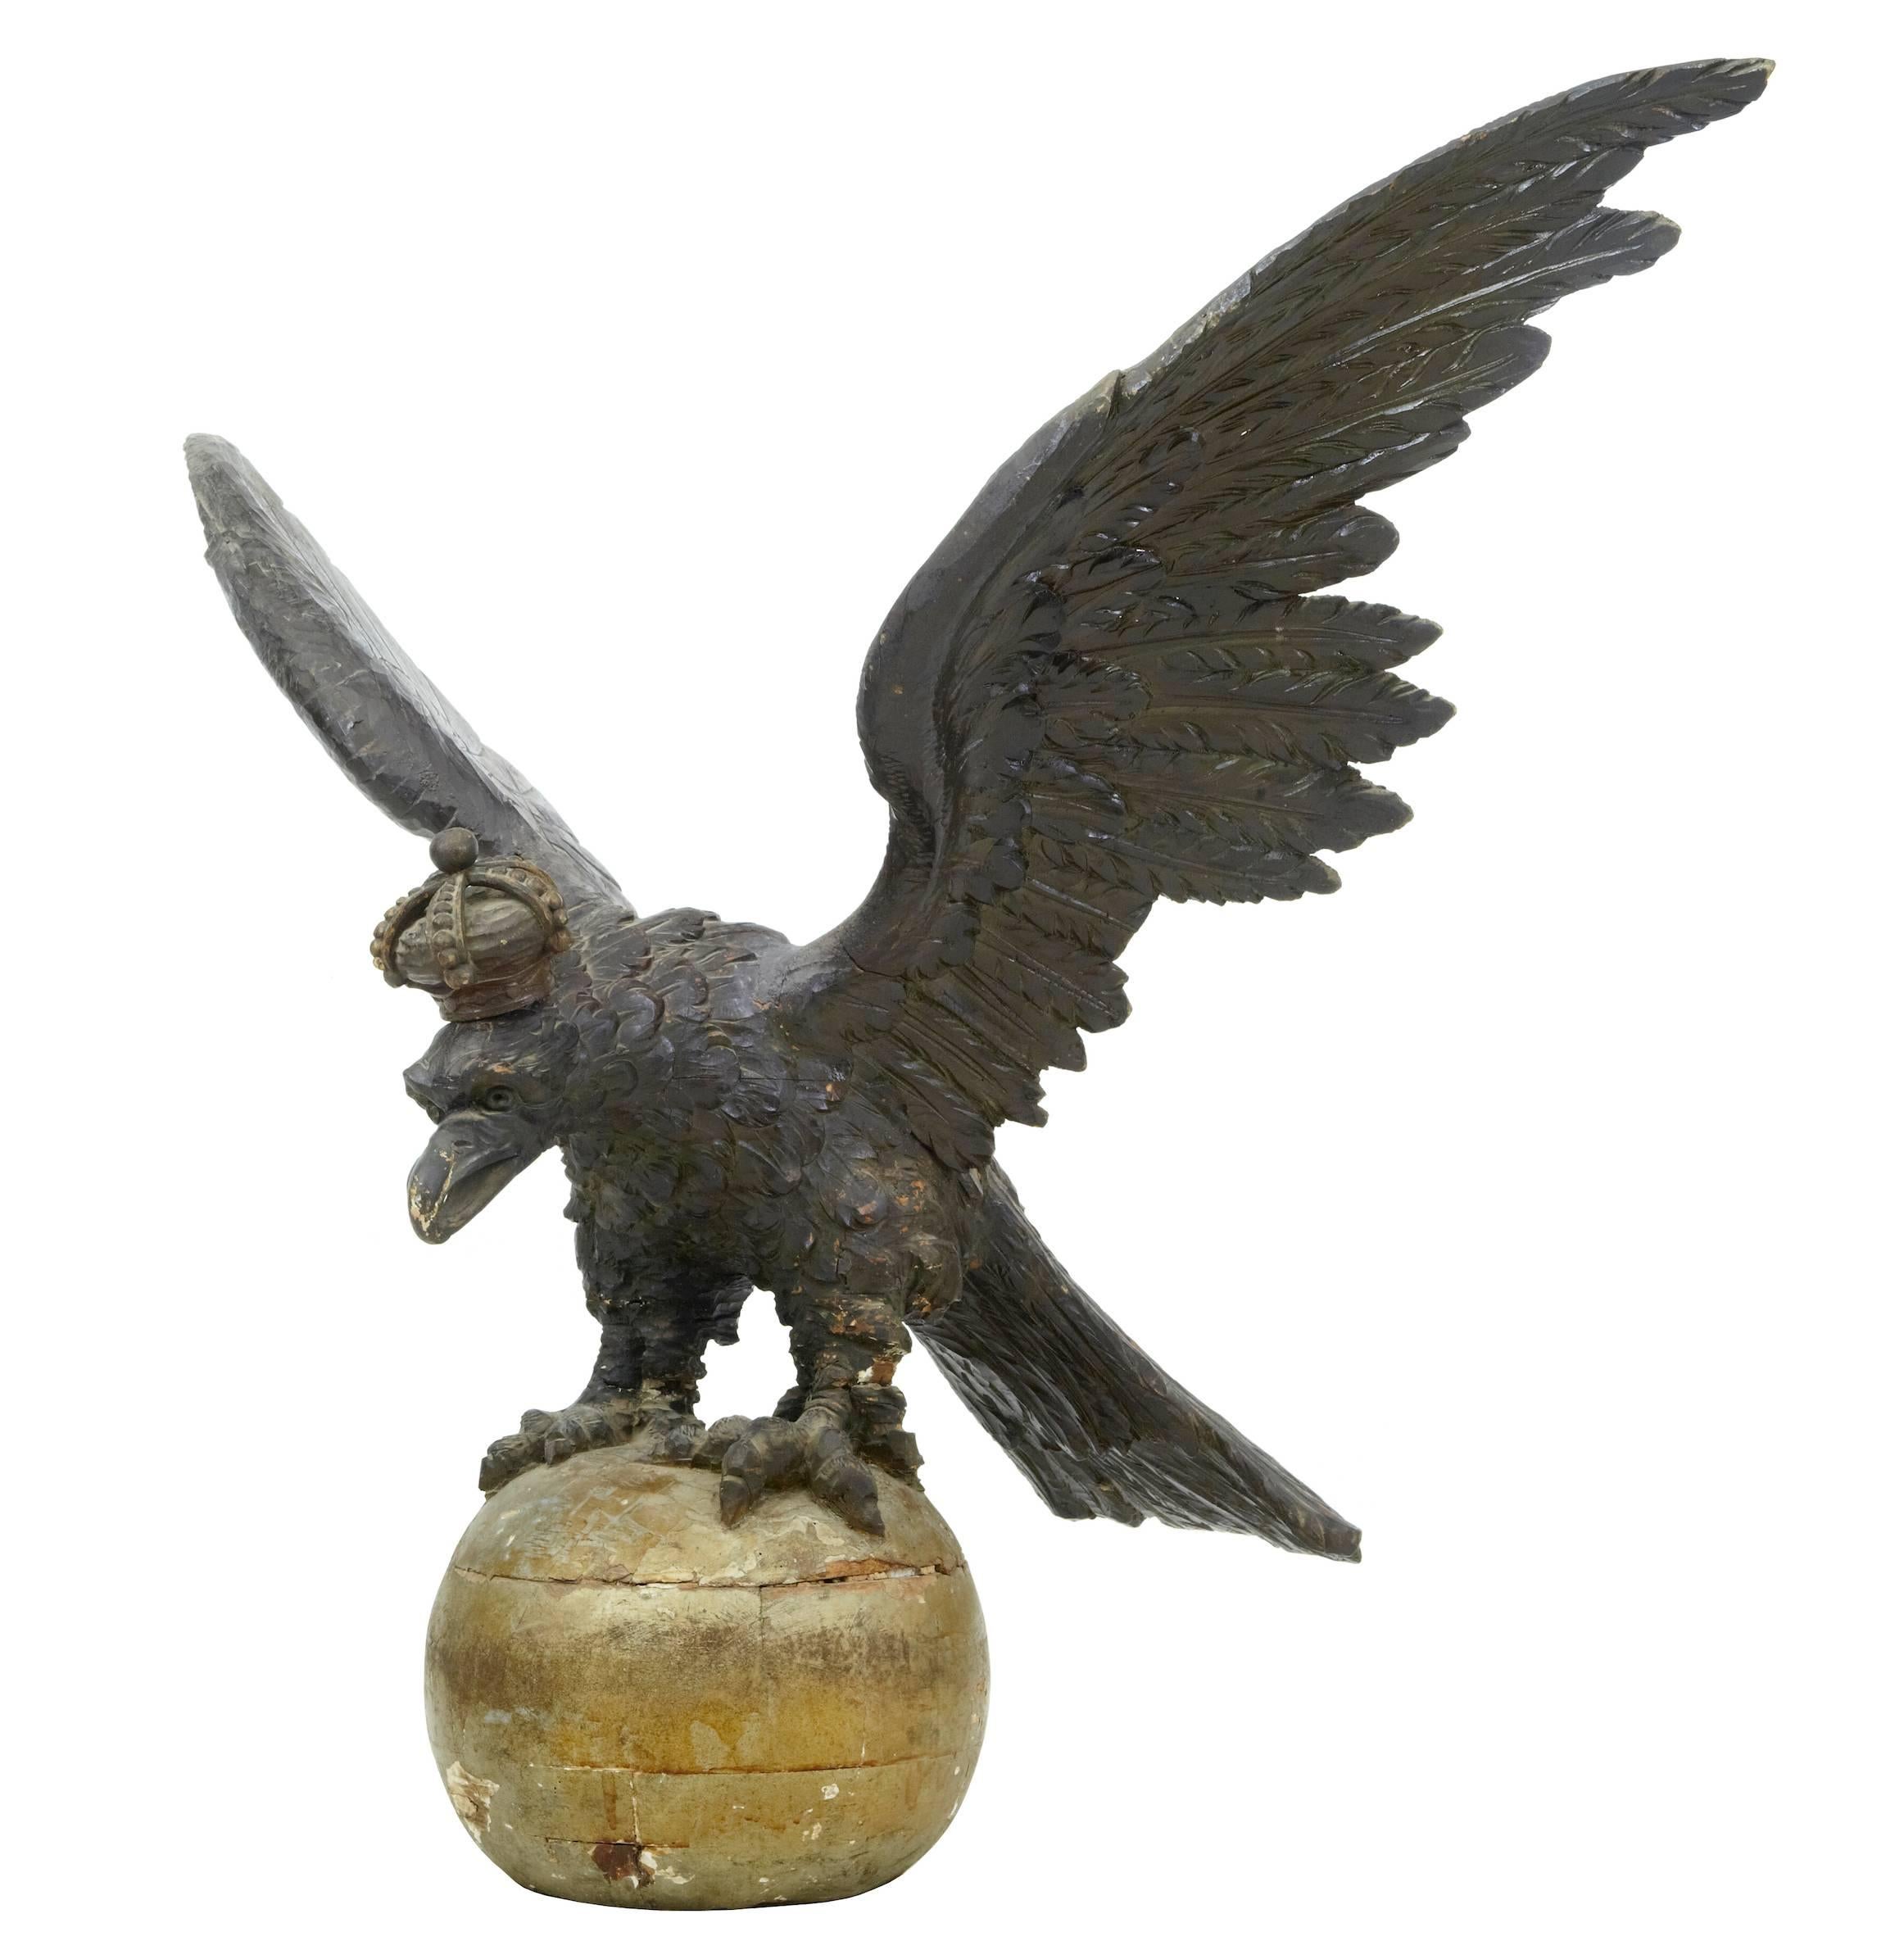 Stunning carved German Hapsburg eagle standing on gilt wood ball, circa 1820.
Profusely carved in linden wood and in near original condition.
In good solid condition.
Some minor restorations and age splits.
One loss to rear feather